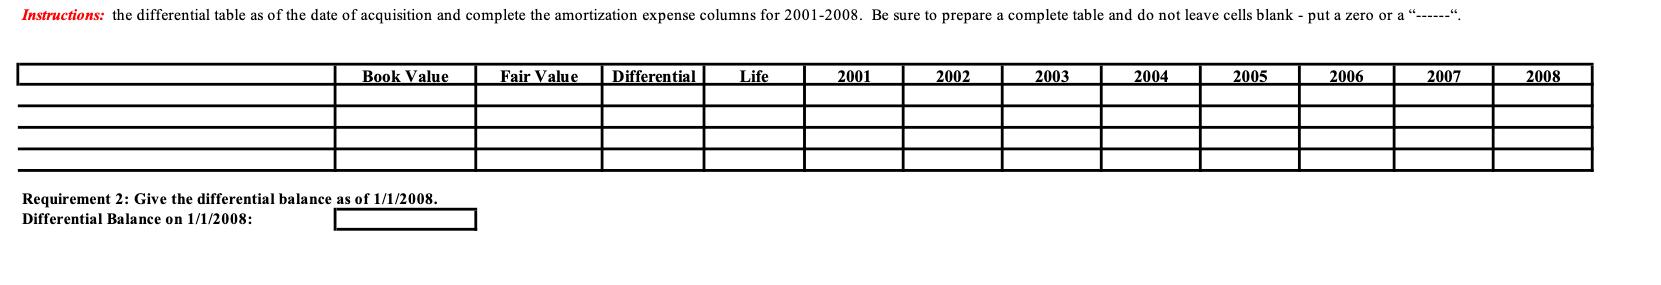 Instructions: the differential table as of the date of acquisition and complete the amortization expense columns for 2001-200